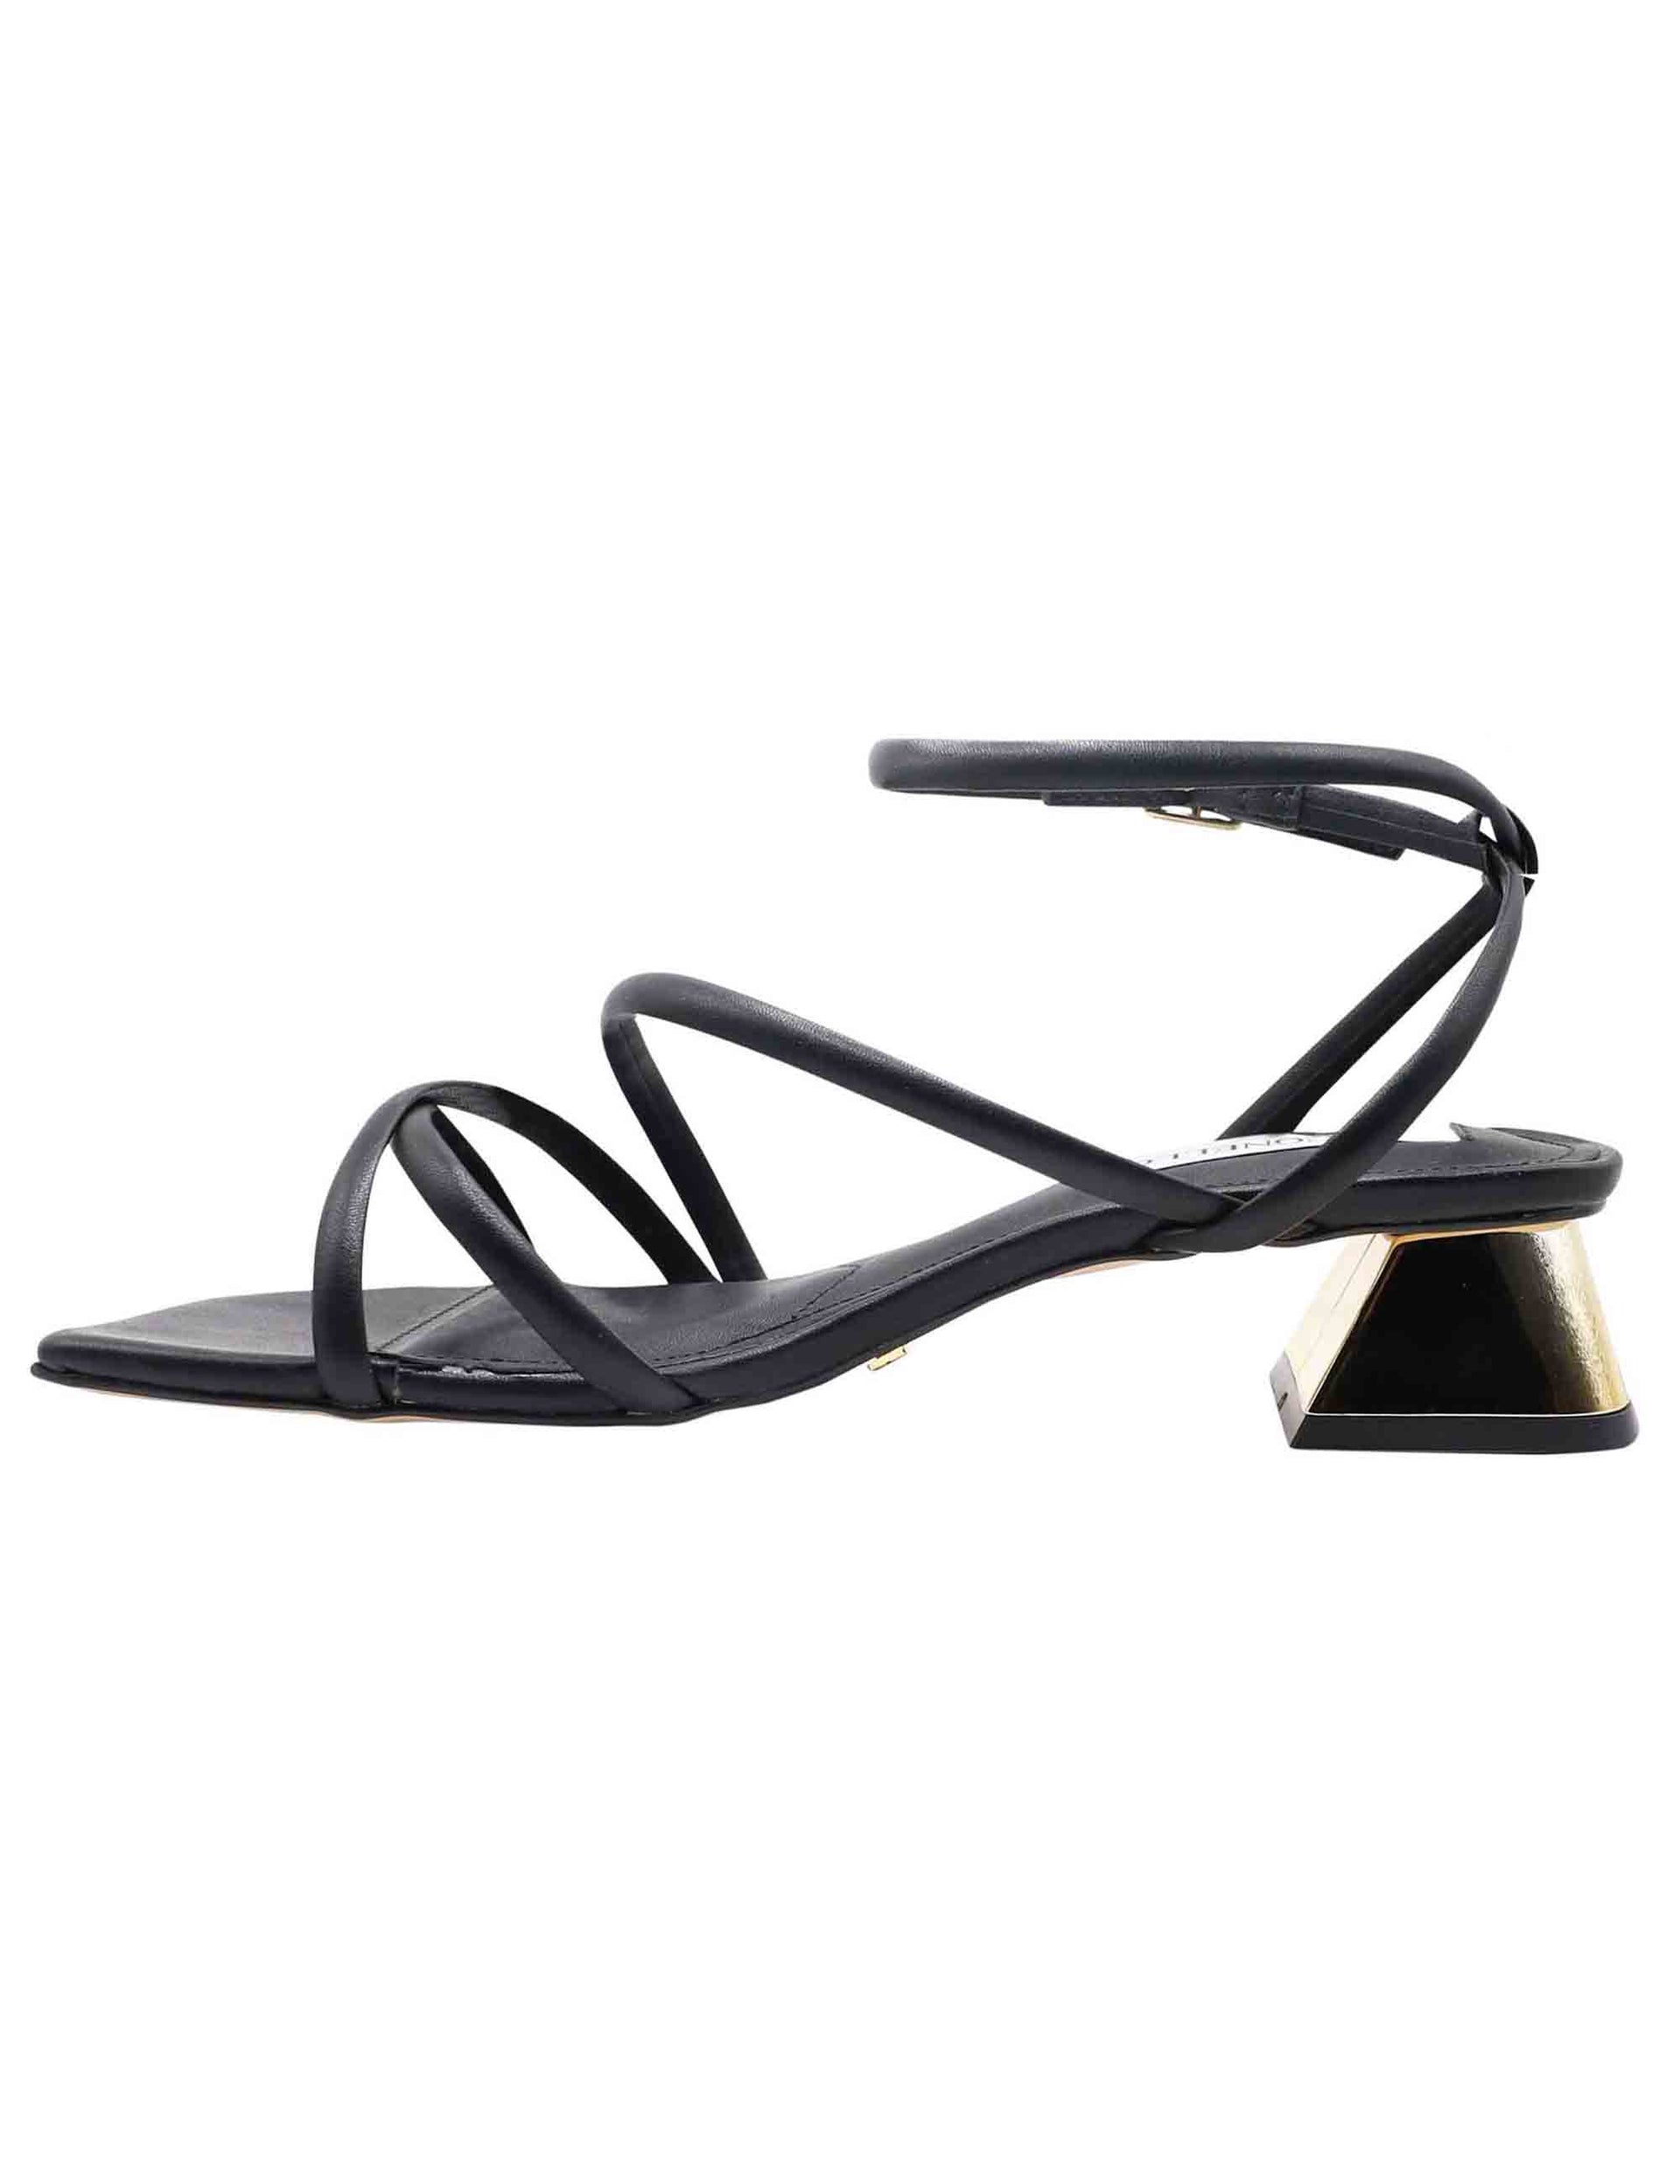 Women's black leather sandals with double crossover ankle strap and jewel heel